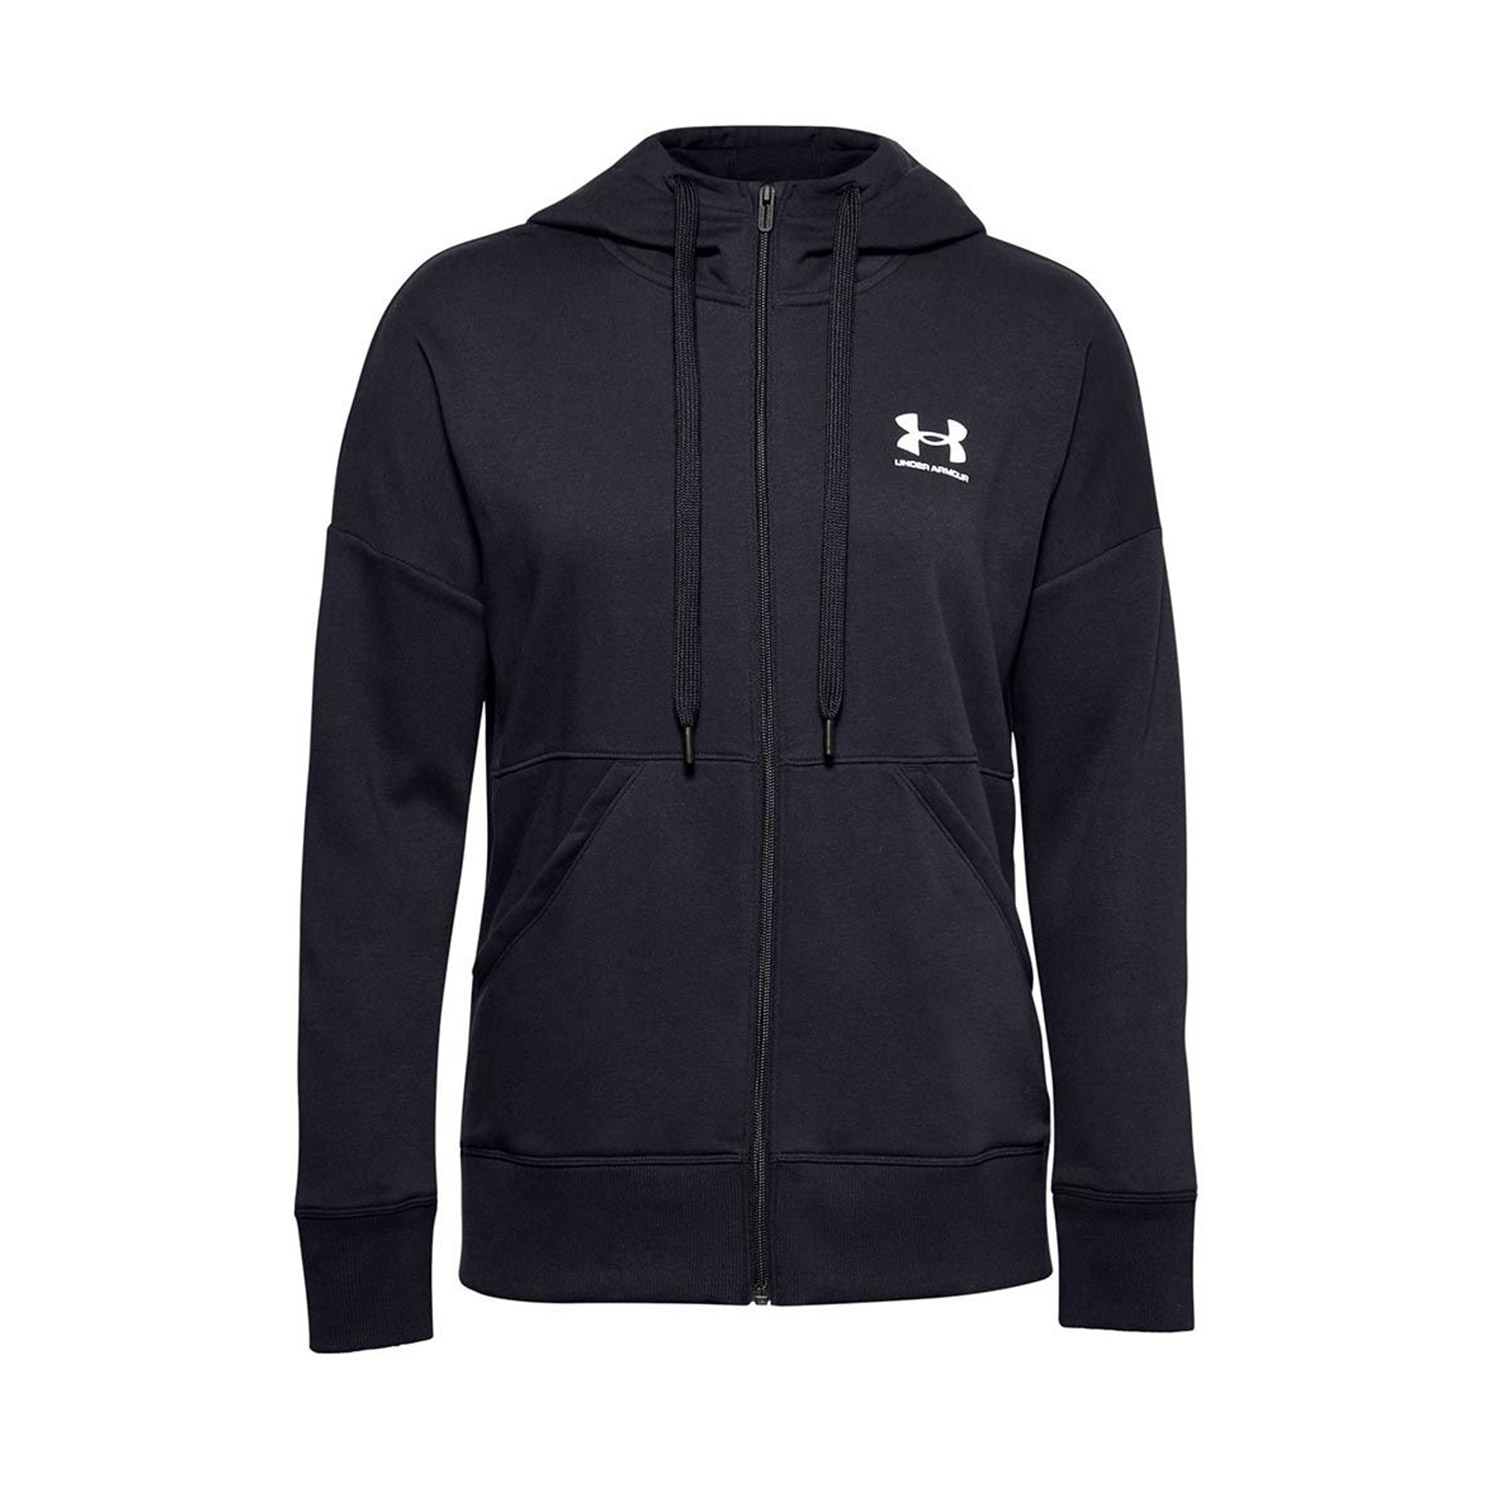 Under Armour Rival Fleece FZ Hoodie Ζακέτα (1356400-001)